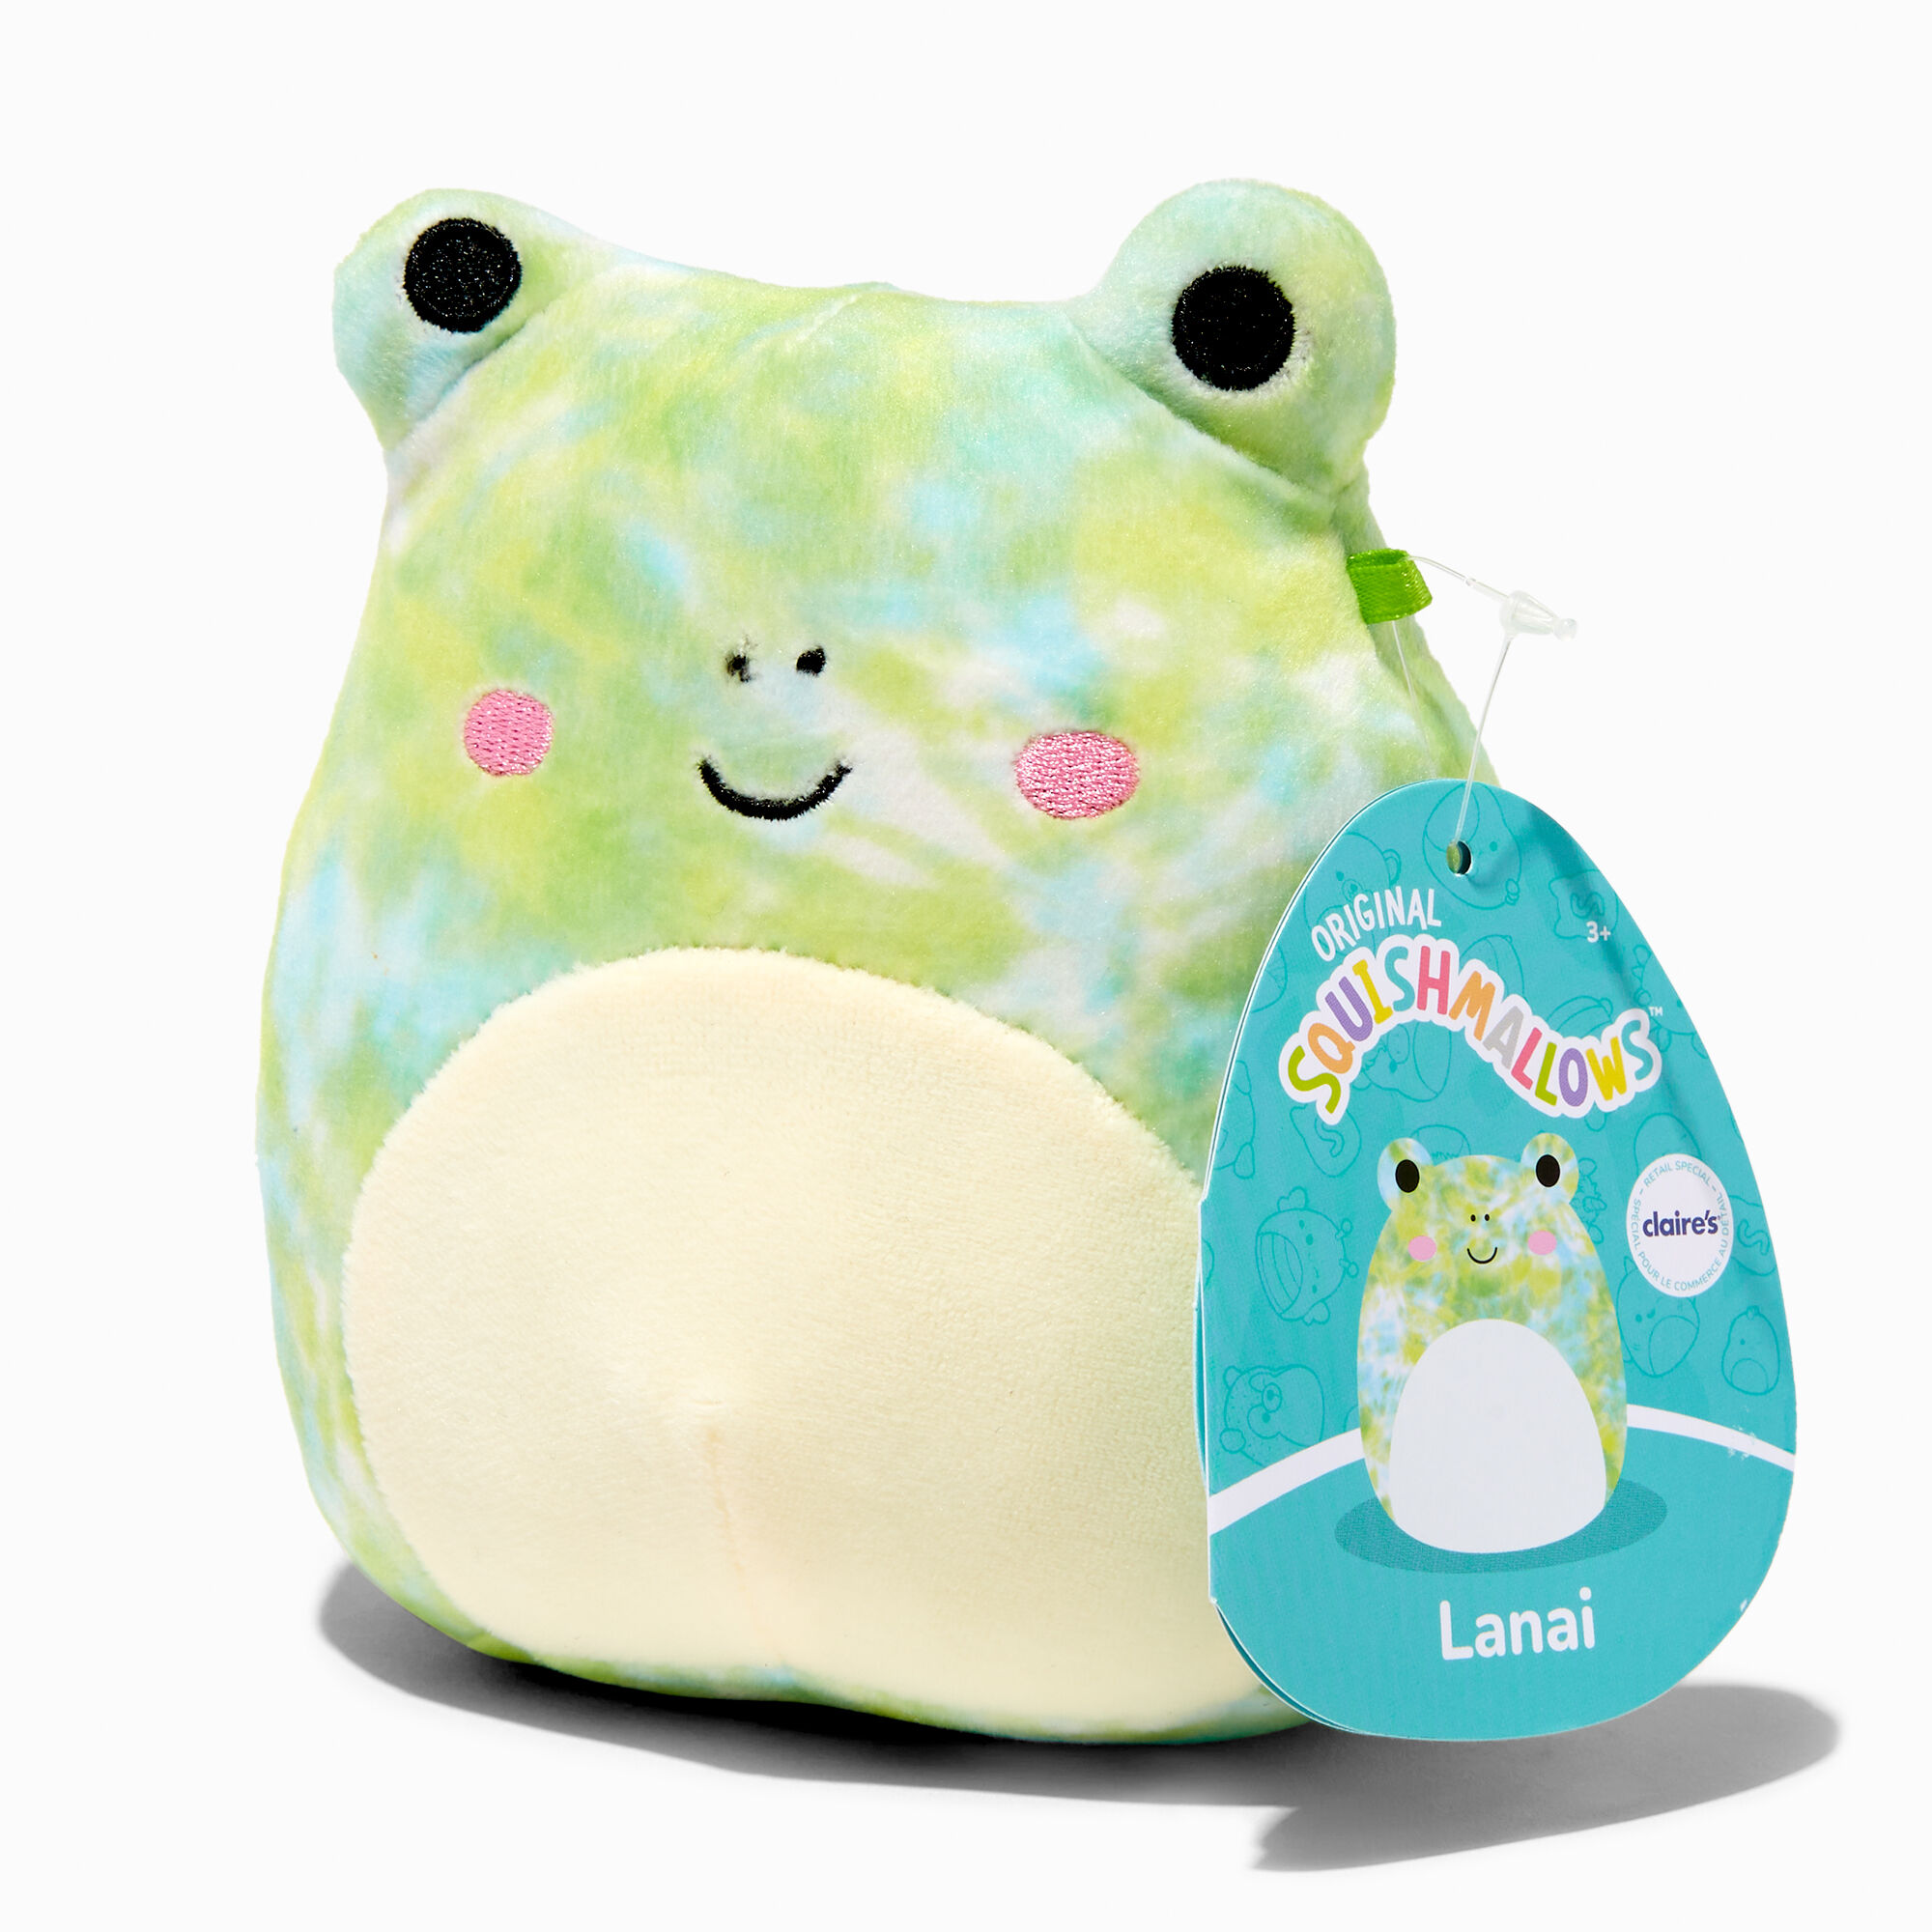 Frog Squishmallow: The Cutest and Softest Toy You Need!